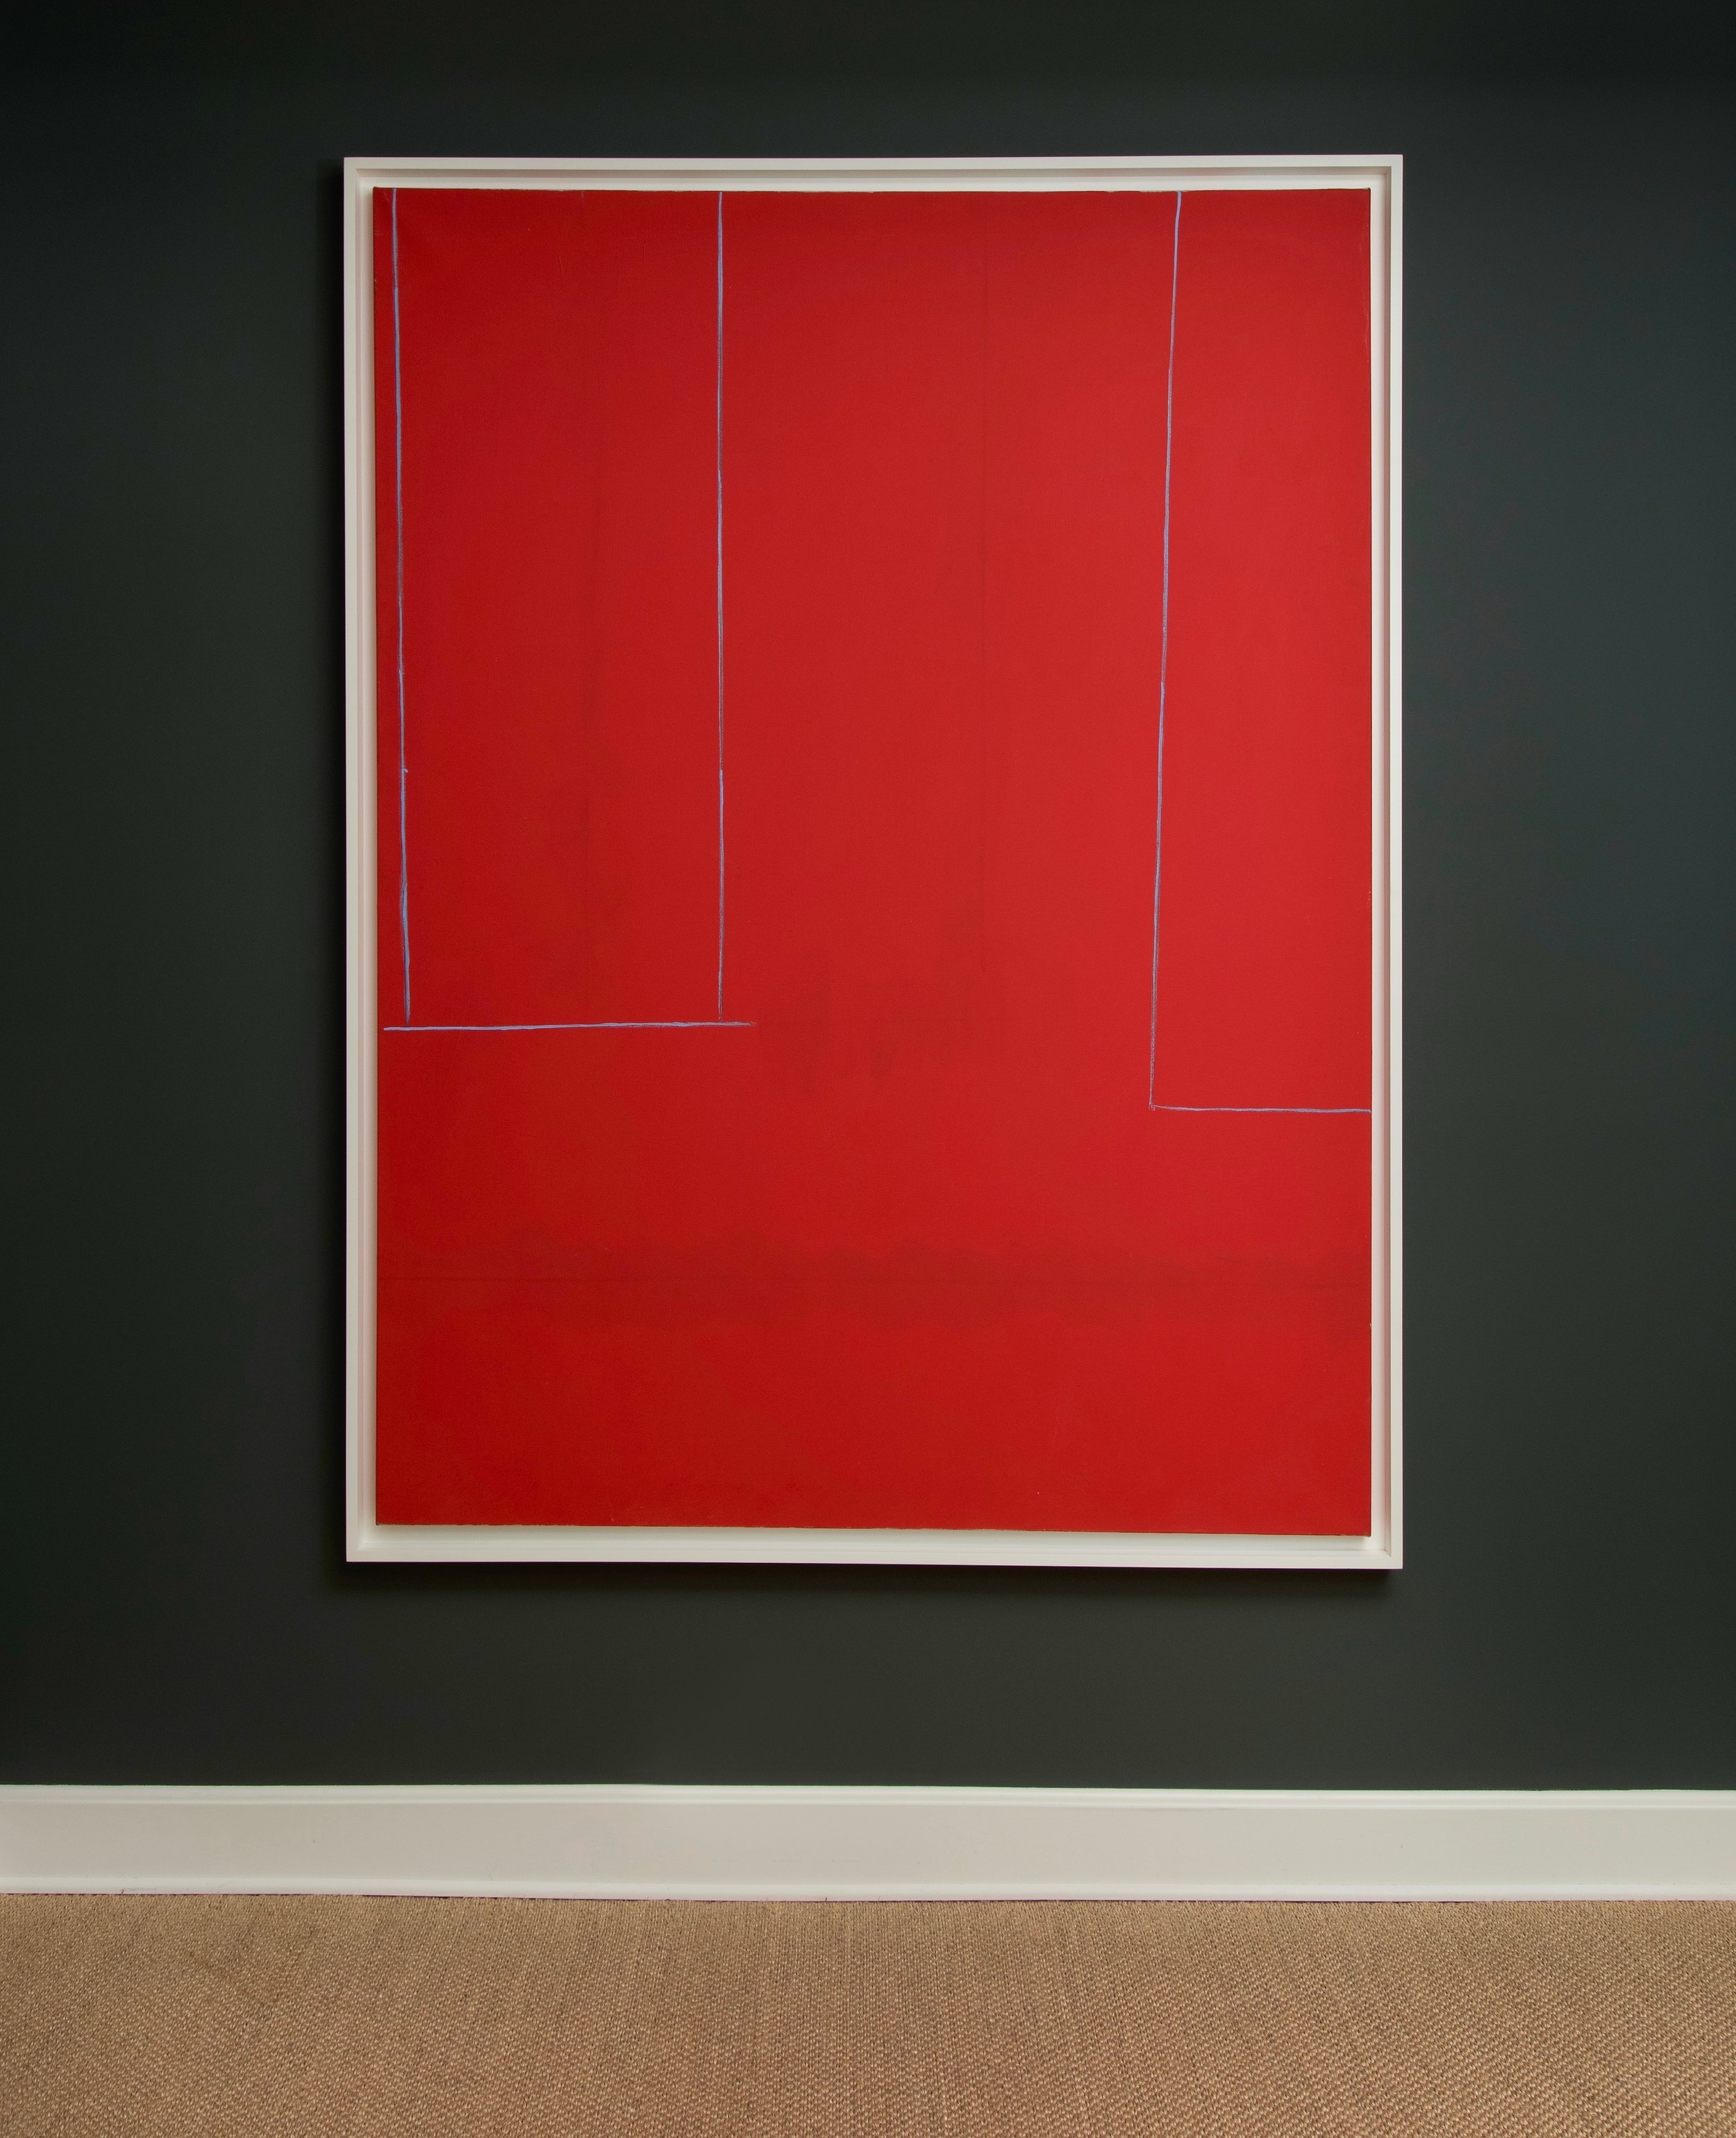  ROBERT MOTHERWELL (1915-1991)   Untitled (Open in Red with Blue Lines) , 1969.&nbsp;Acrylic and charcoal on canvas.&nbsp;74 x 55 3/8 inches.   